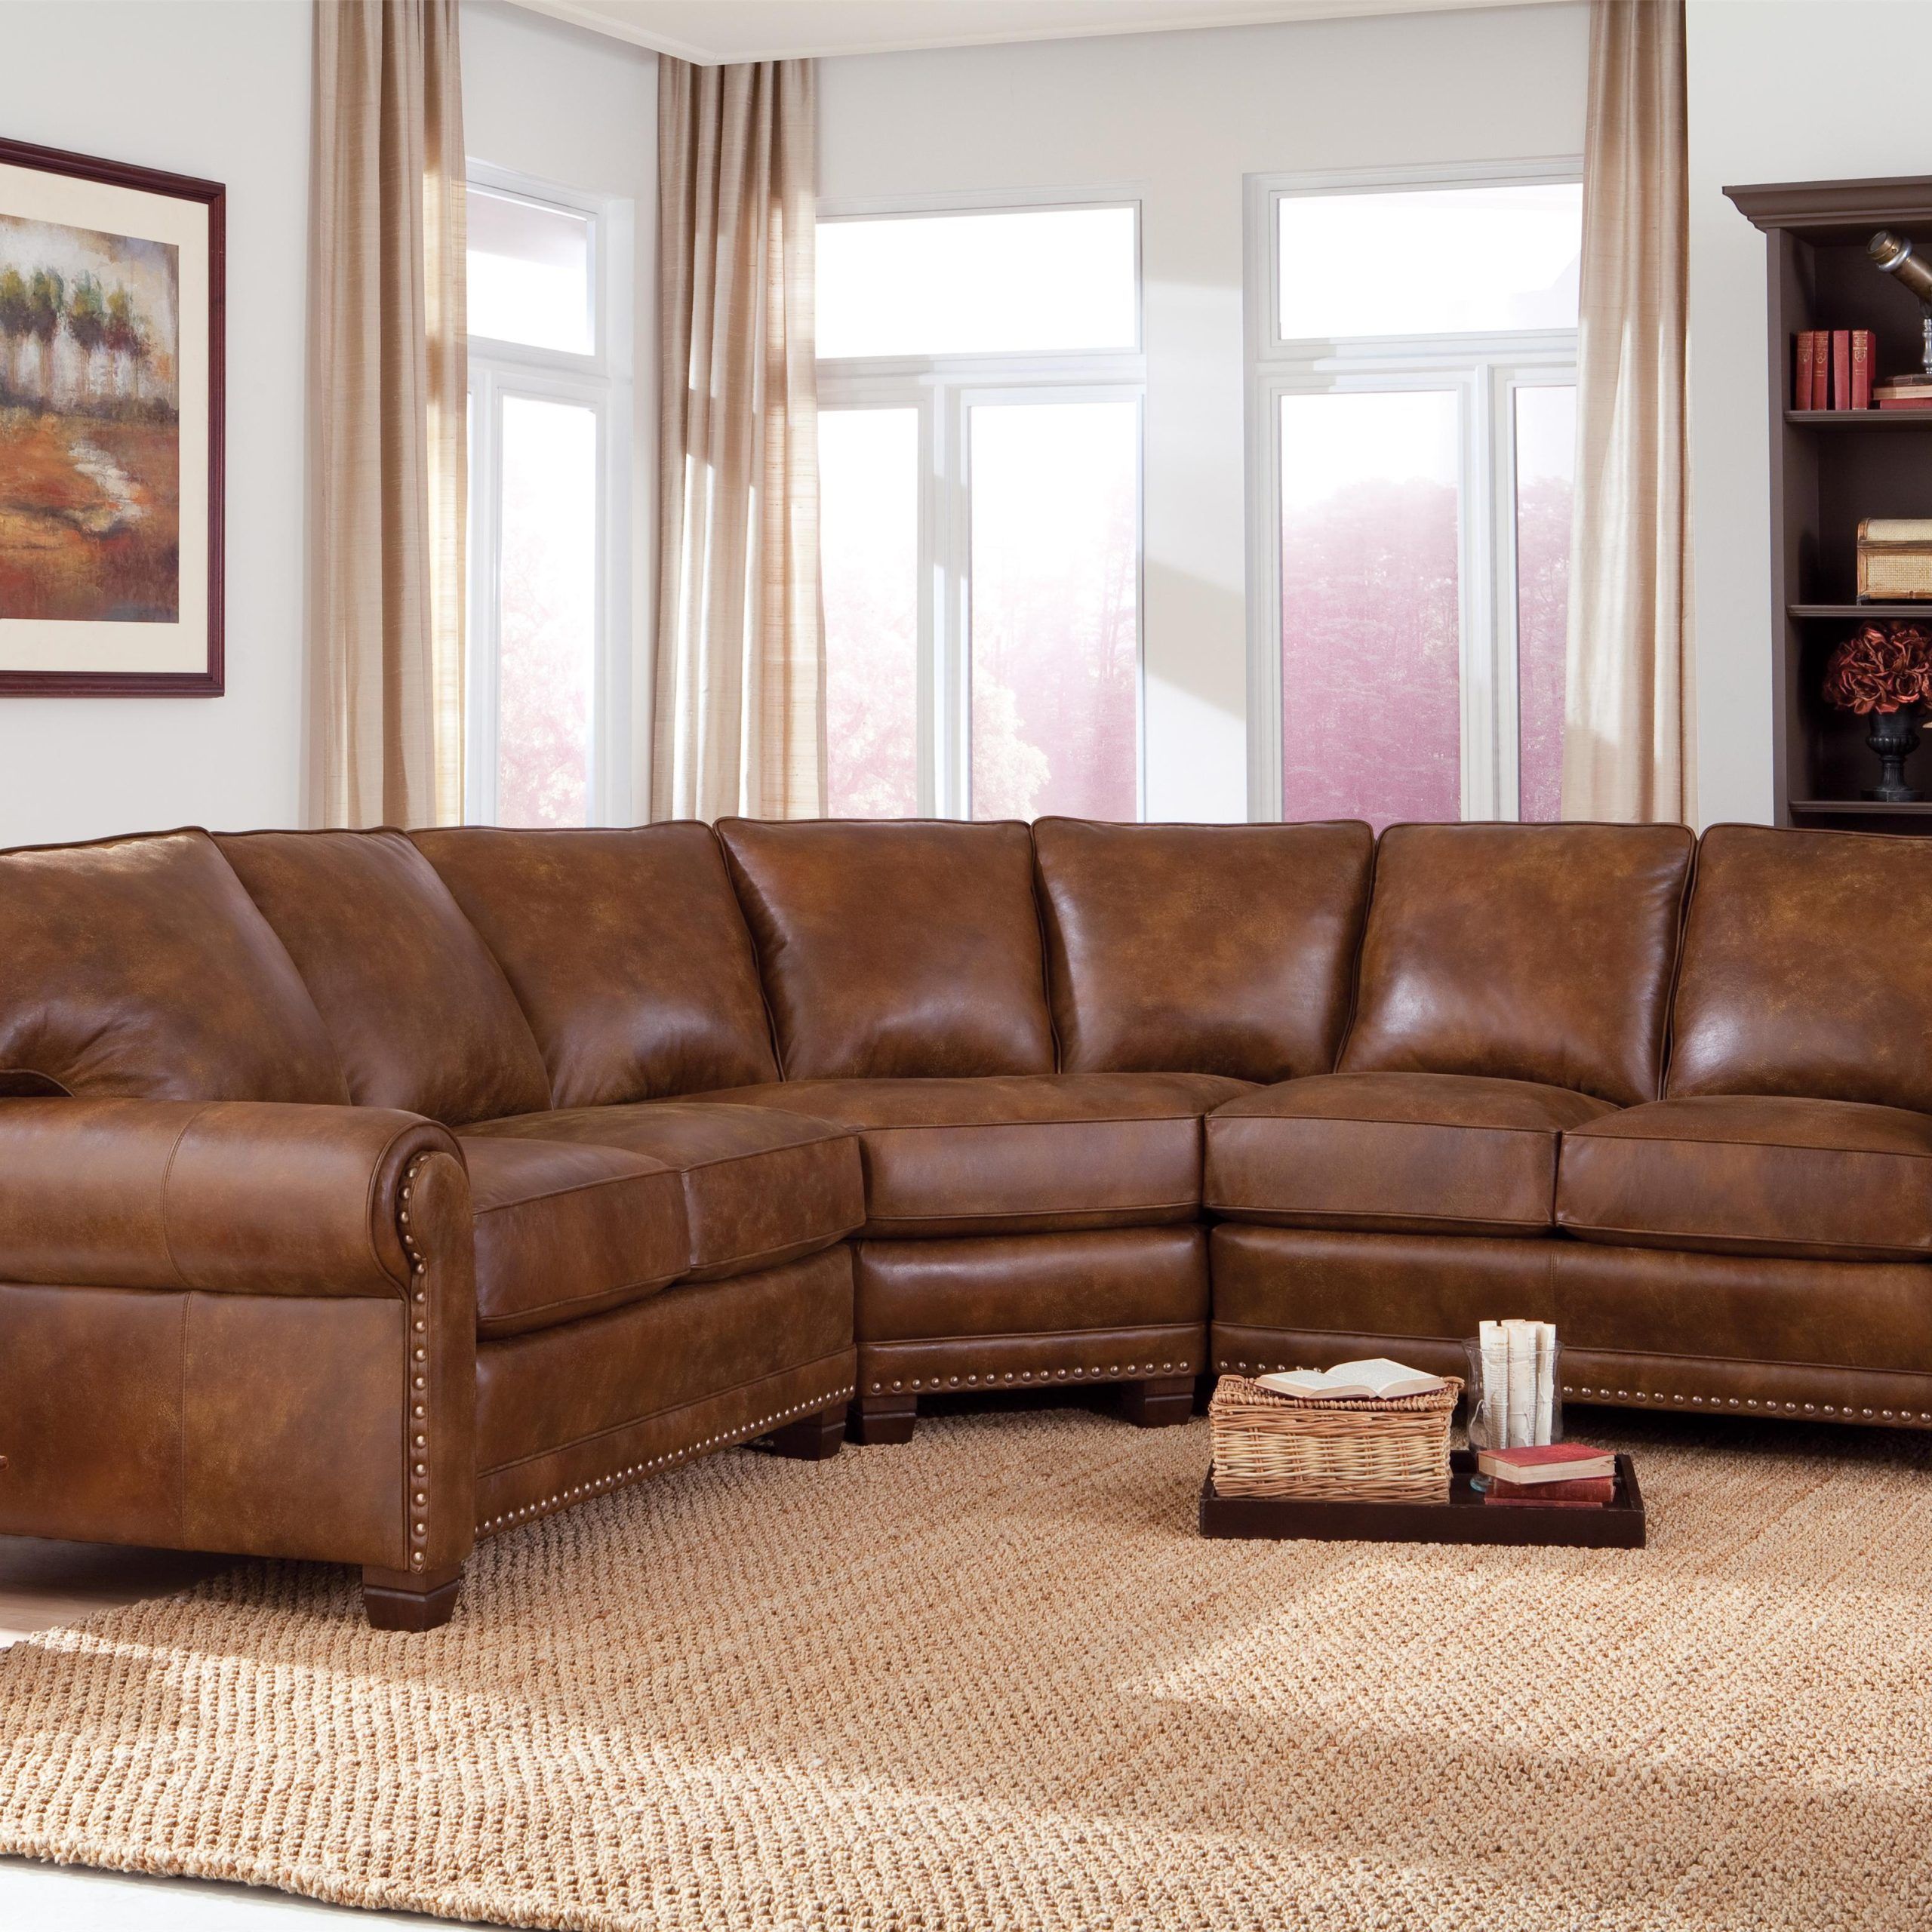 Traditional 3 Piece Sectional Sofa With Nailhead Trimsmith Brothers Inside 3 Piece Leather Sectional Sofa Sets (Gallery 4 of 20)